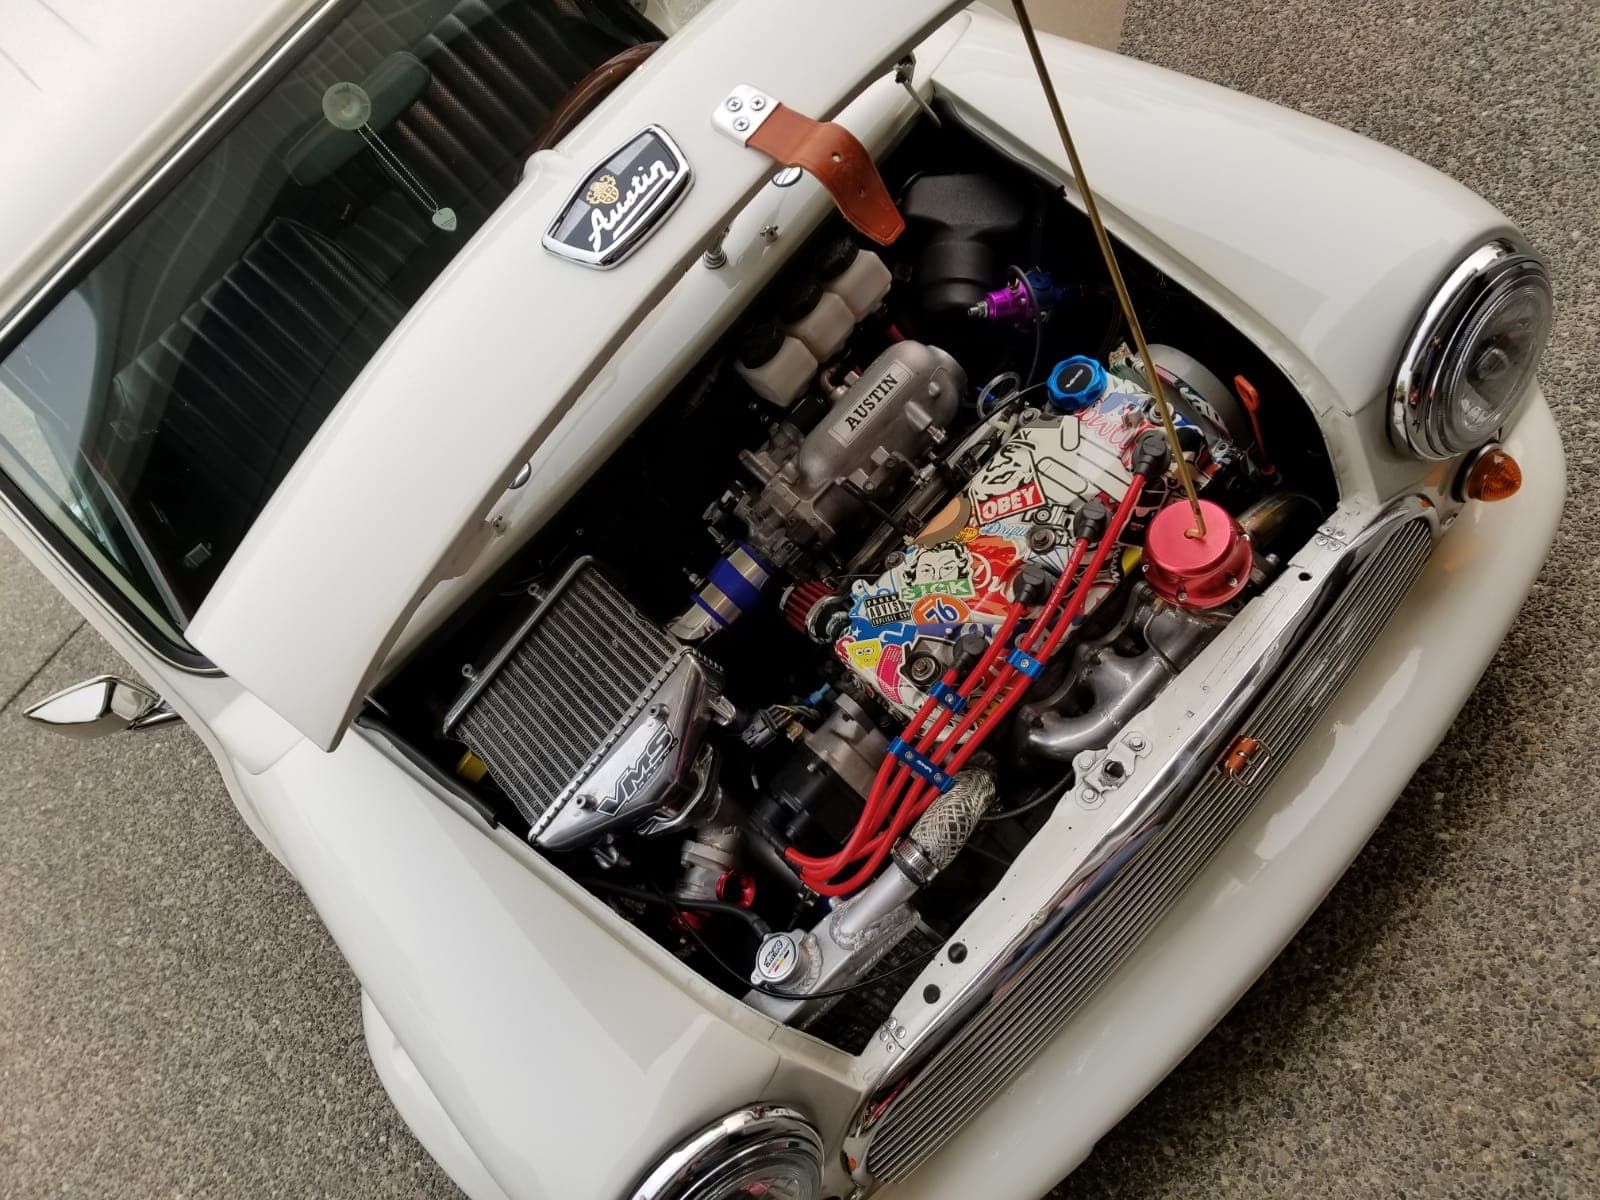 The Second Coming of the Austin Mini